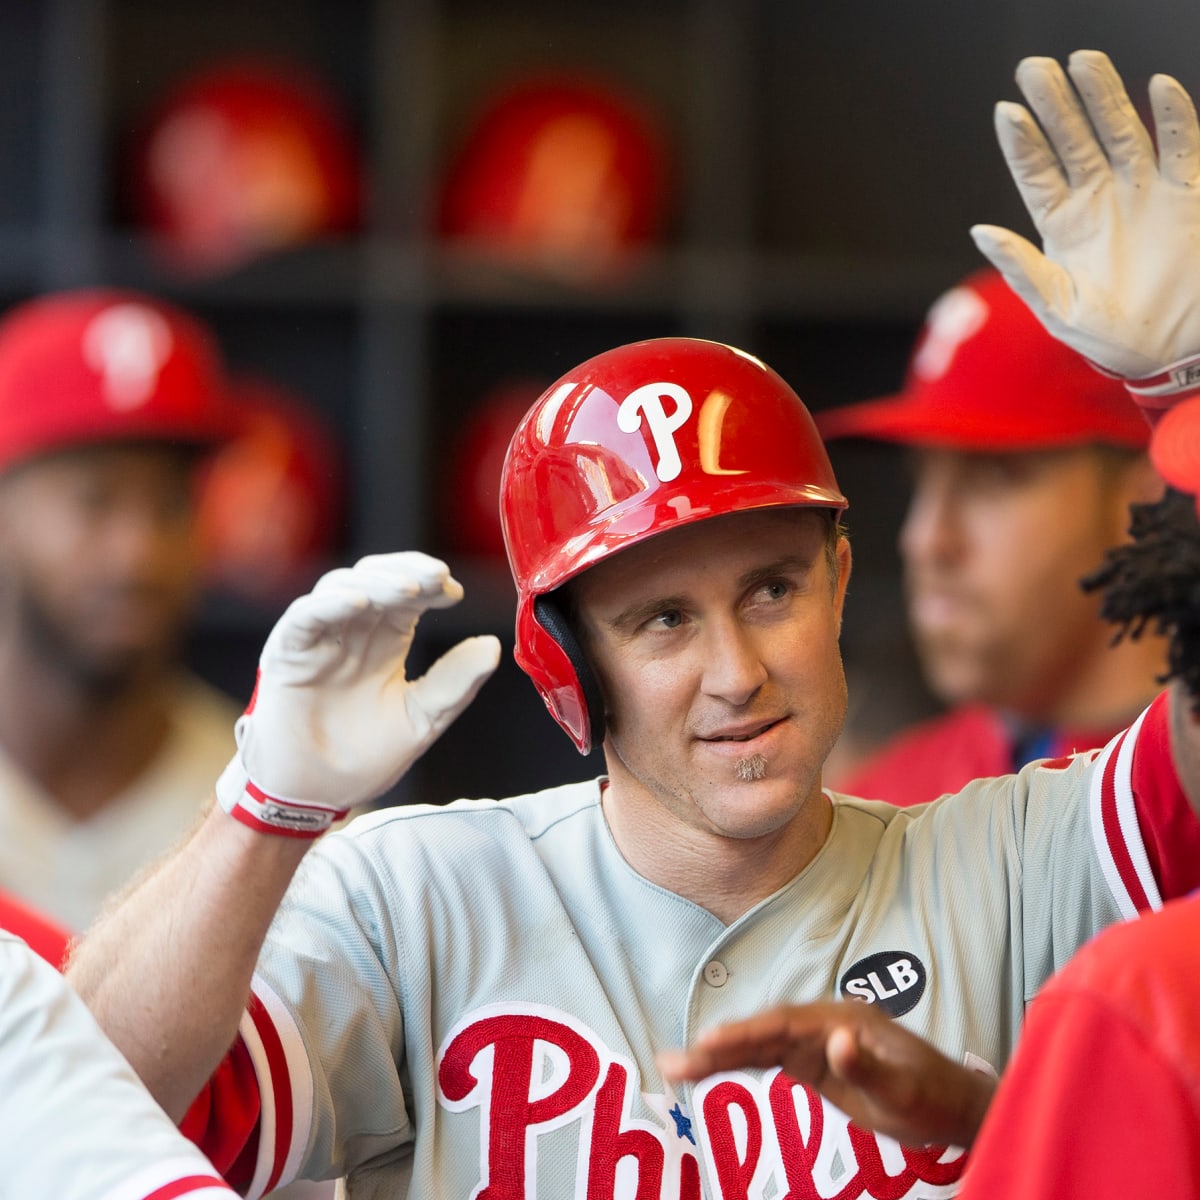 Chase Utley will only agree to trade if given opportunity to dirty